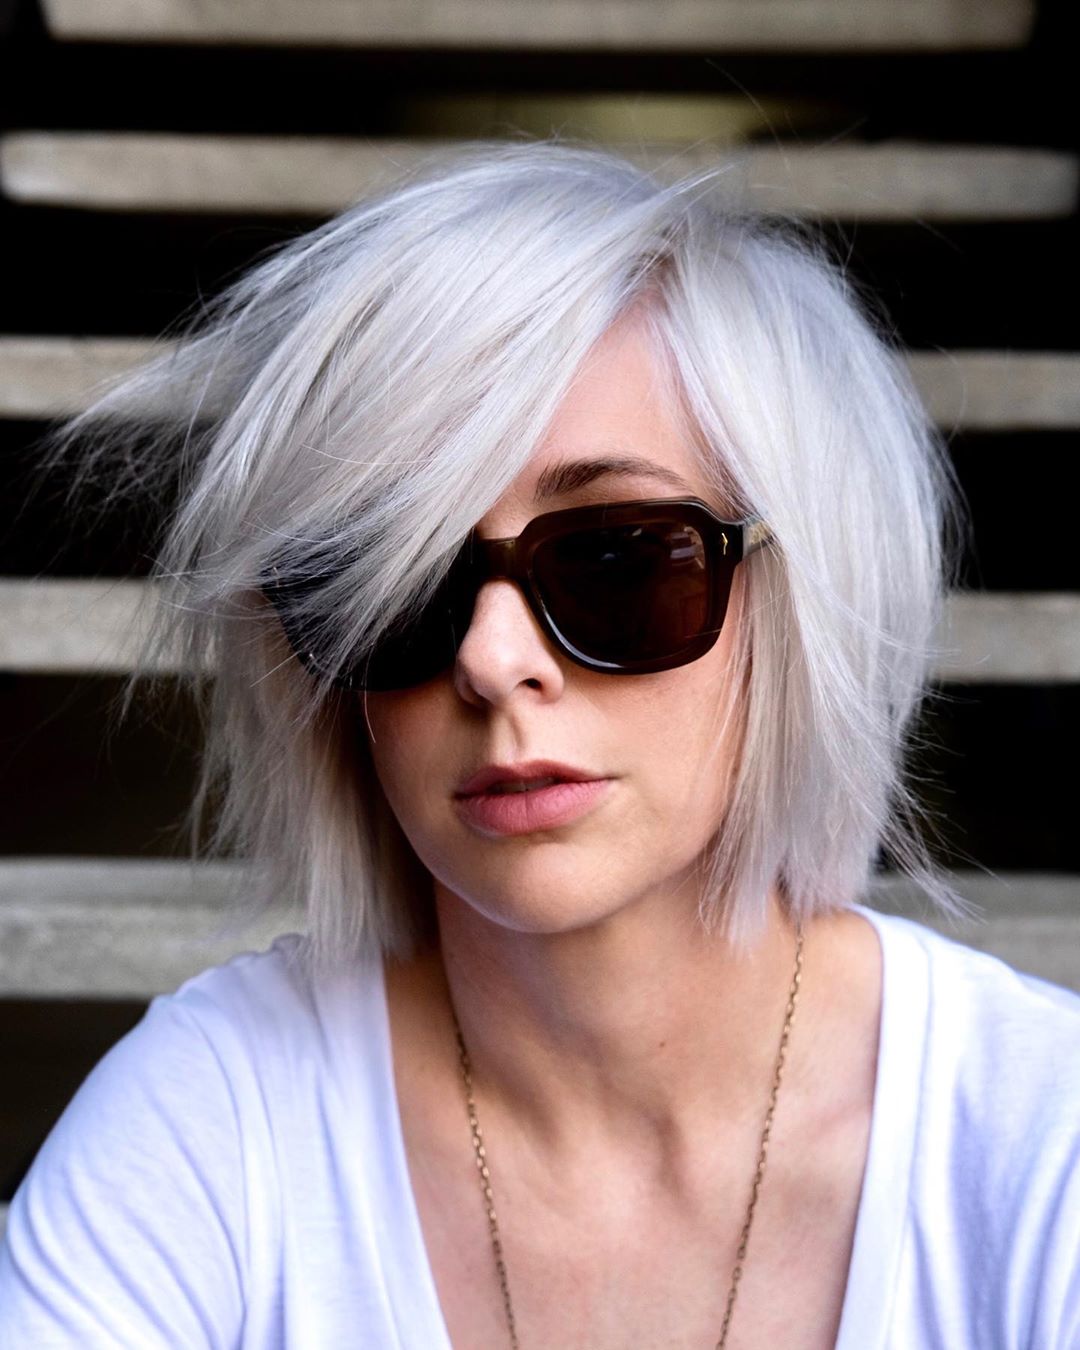 10 Short Haircut Designs for Straight Hair - Color Me Trendy!